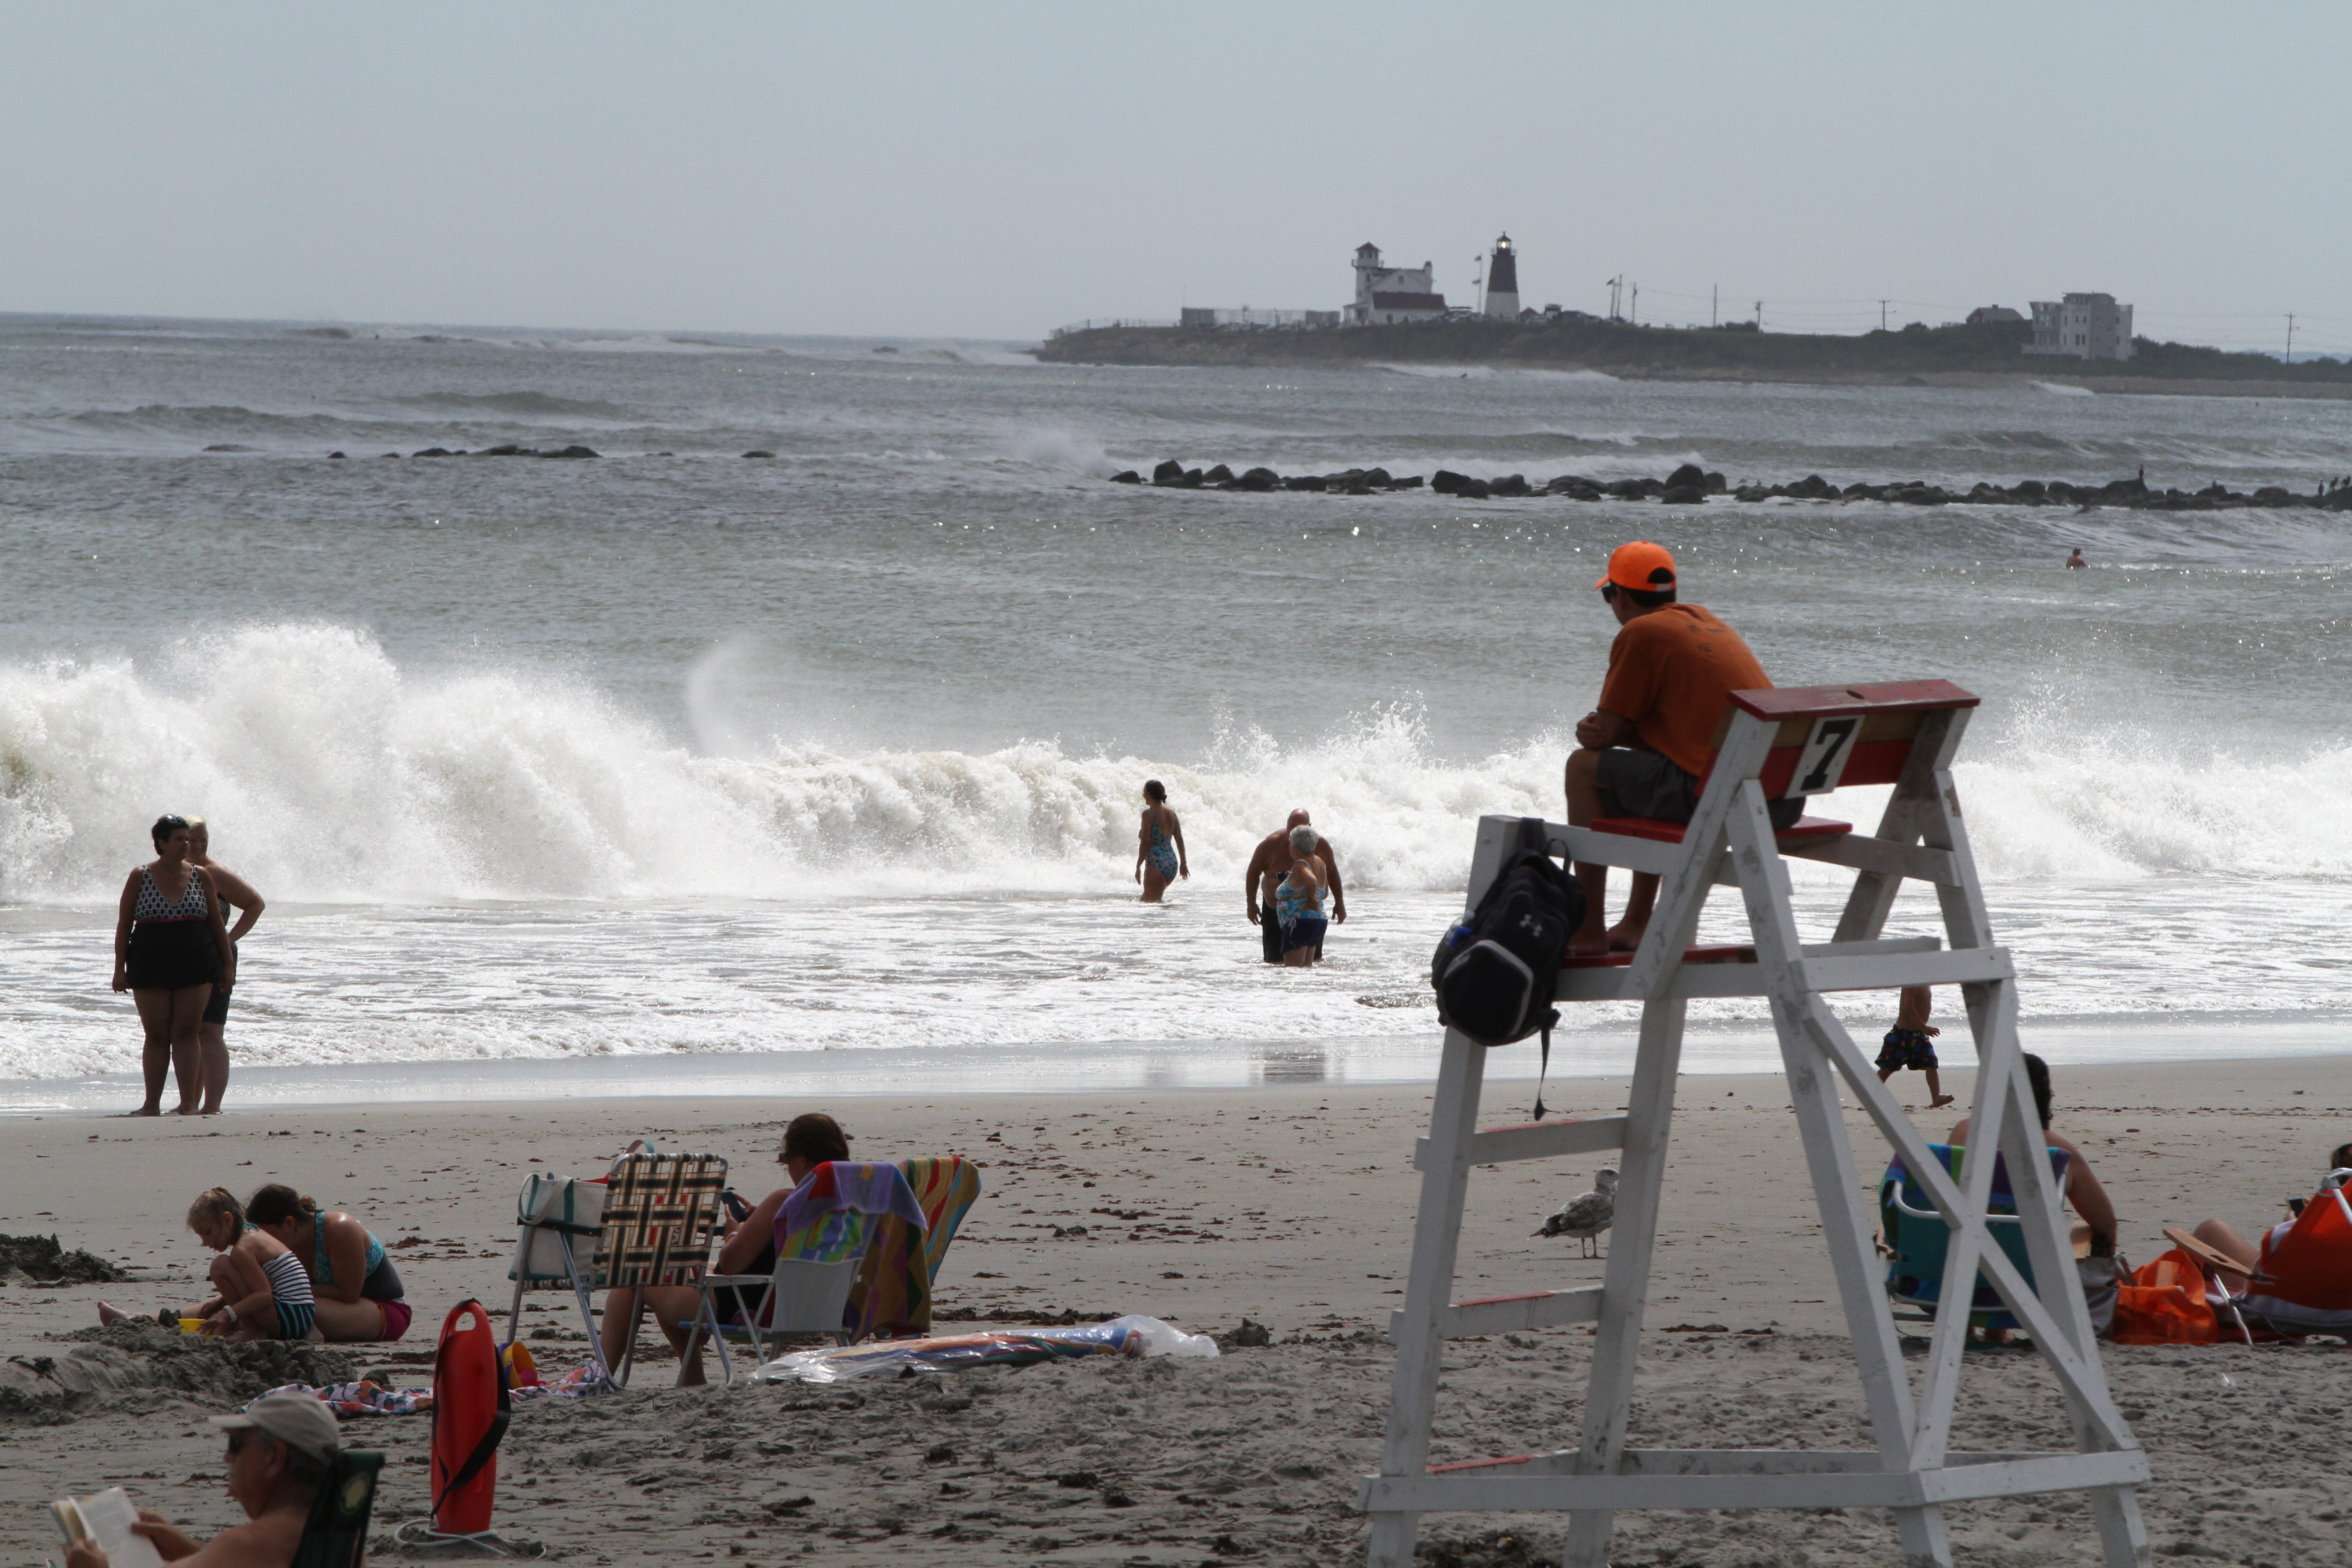 Two RI state beaches are opening early this year. Will the weather cooperate?